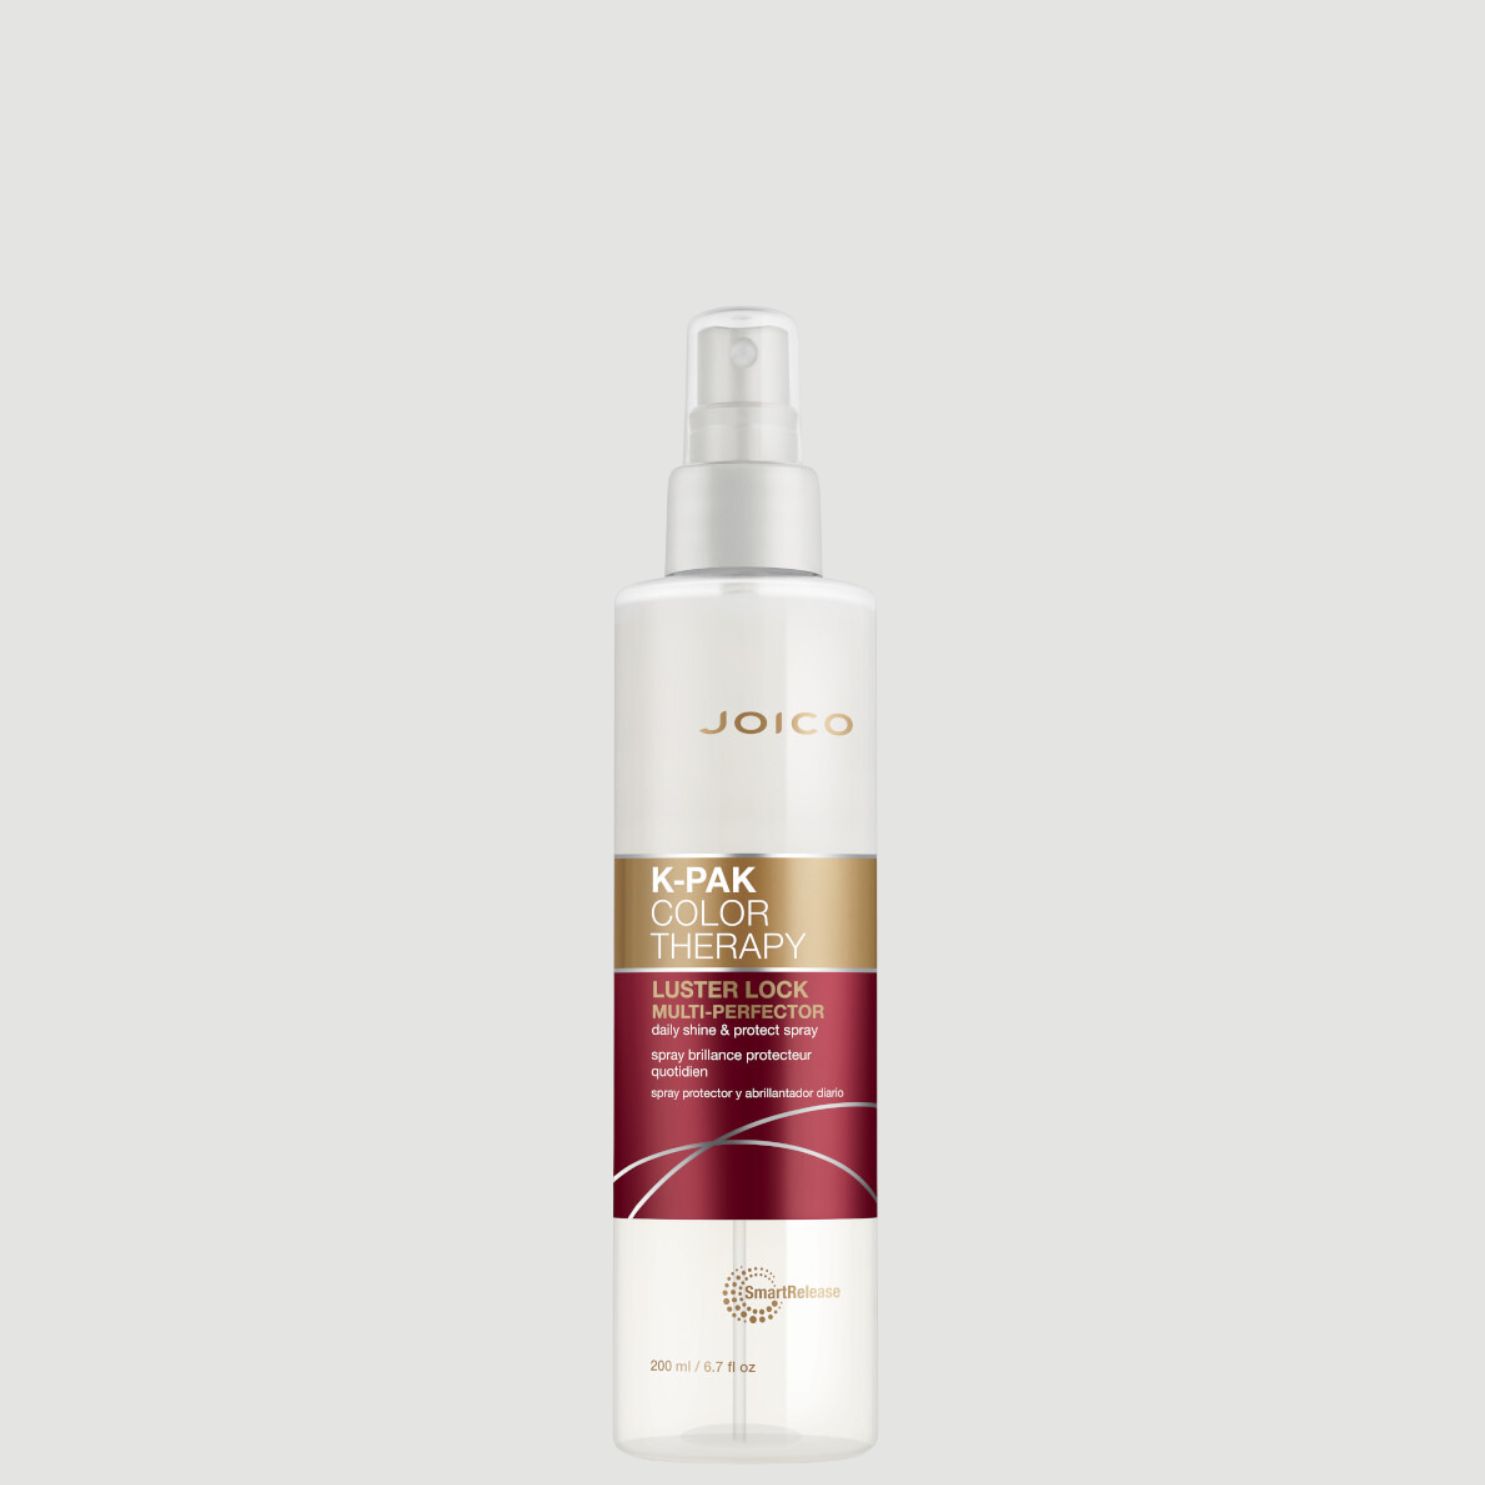 Joico K-Pak Color Therapy Multi-Perfector Daily Shine & Protect Spray Product Image